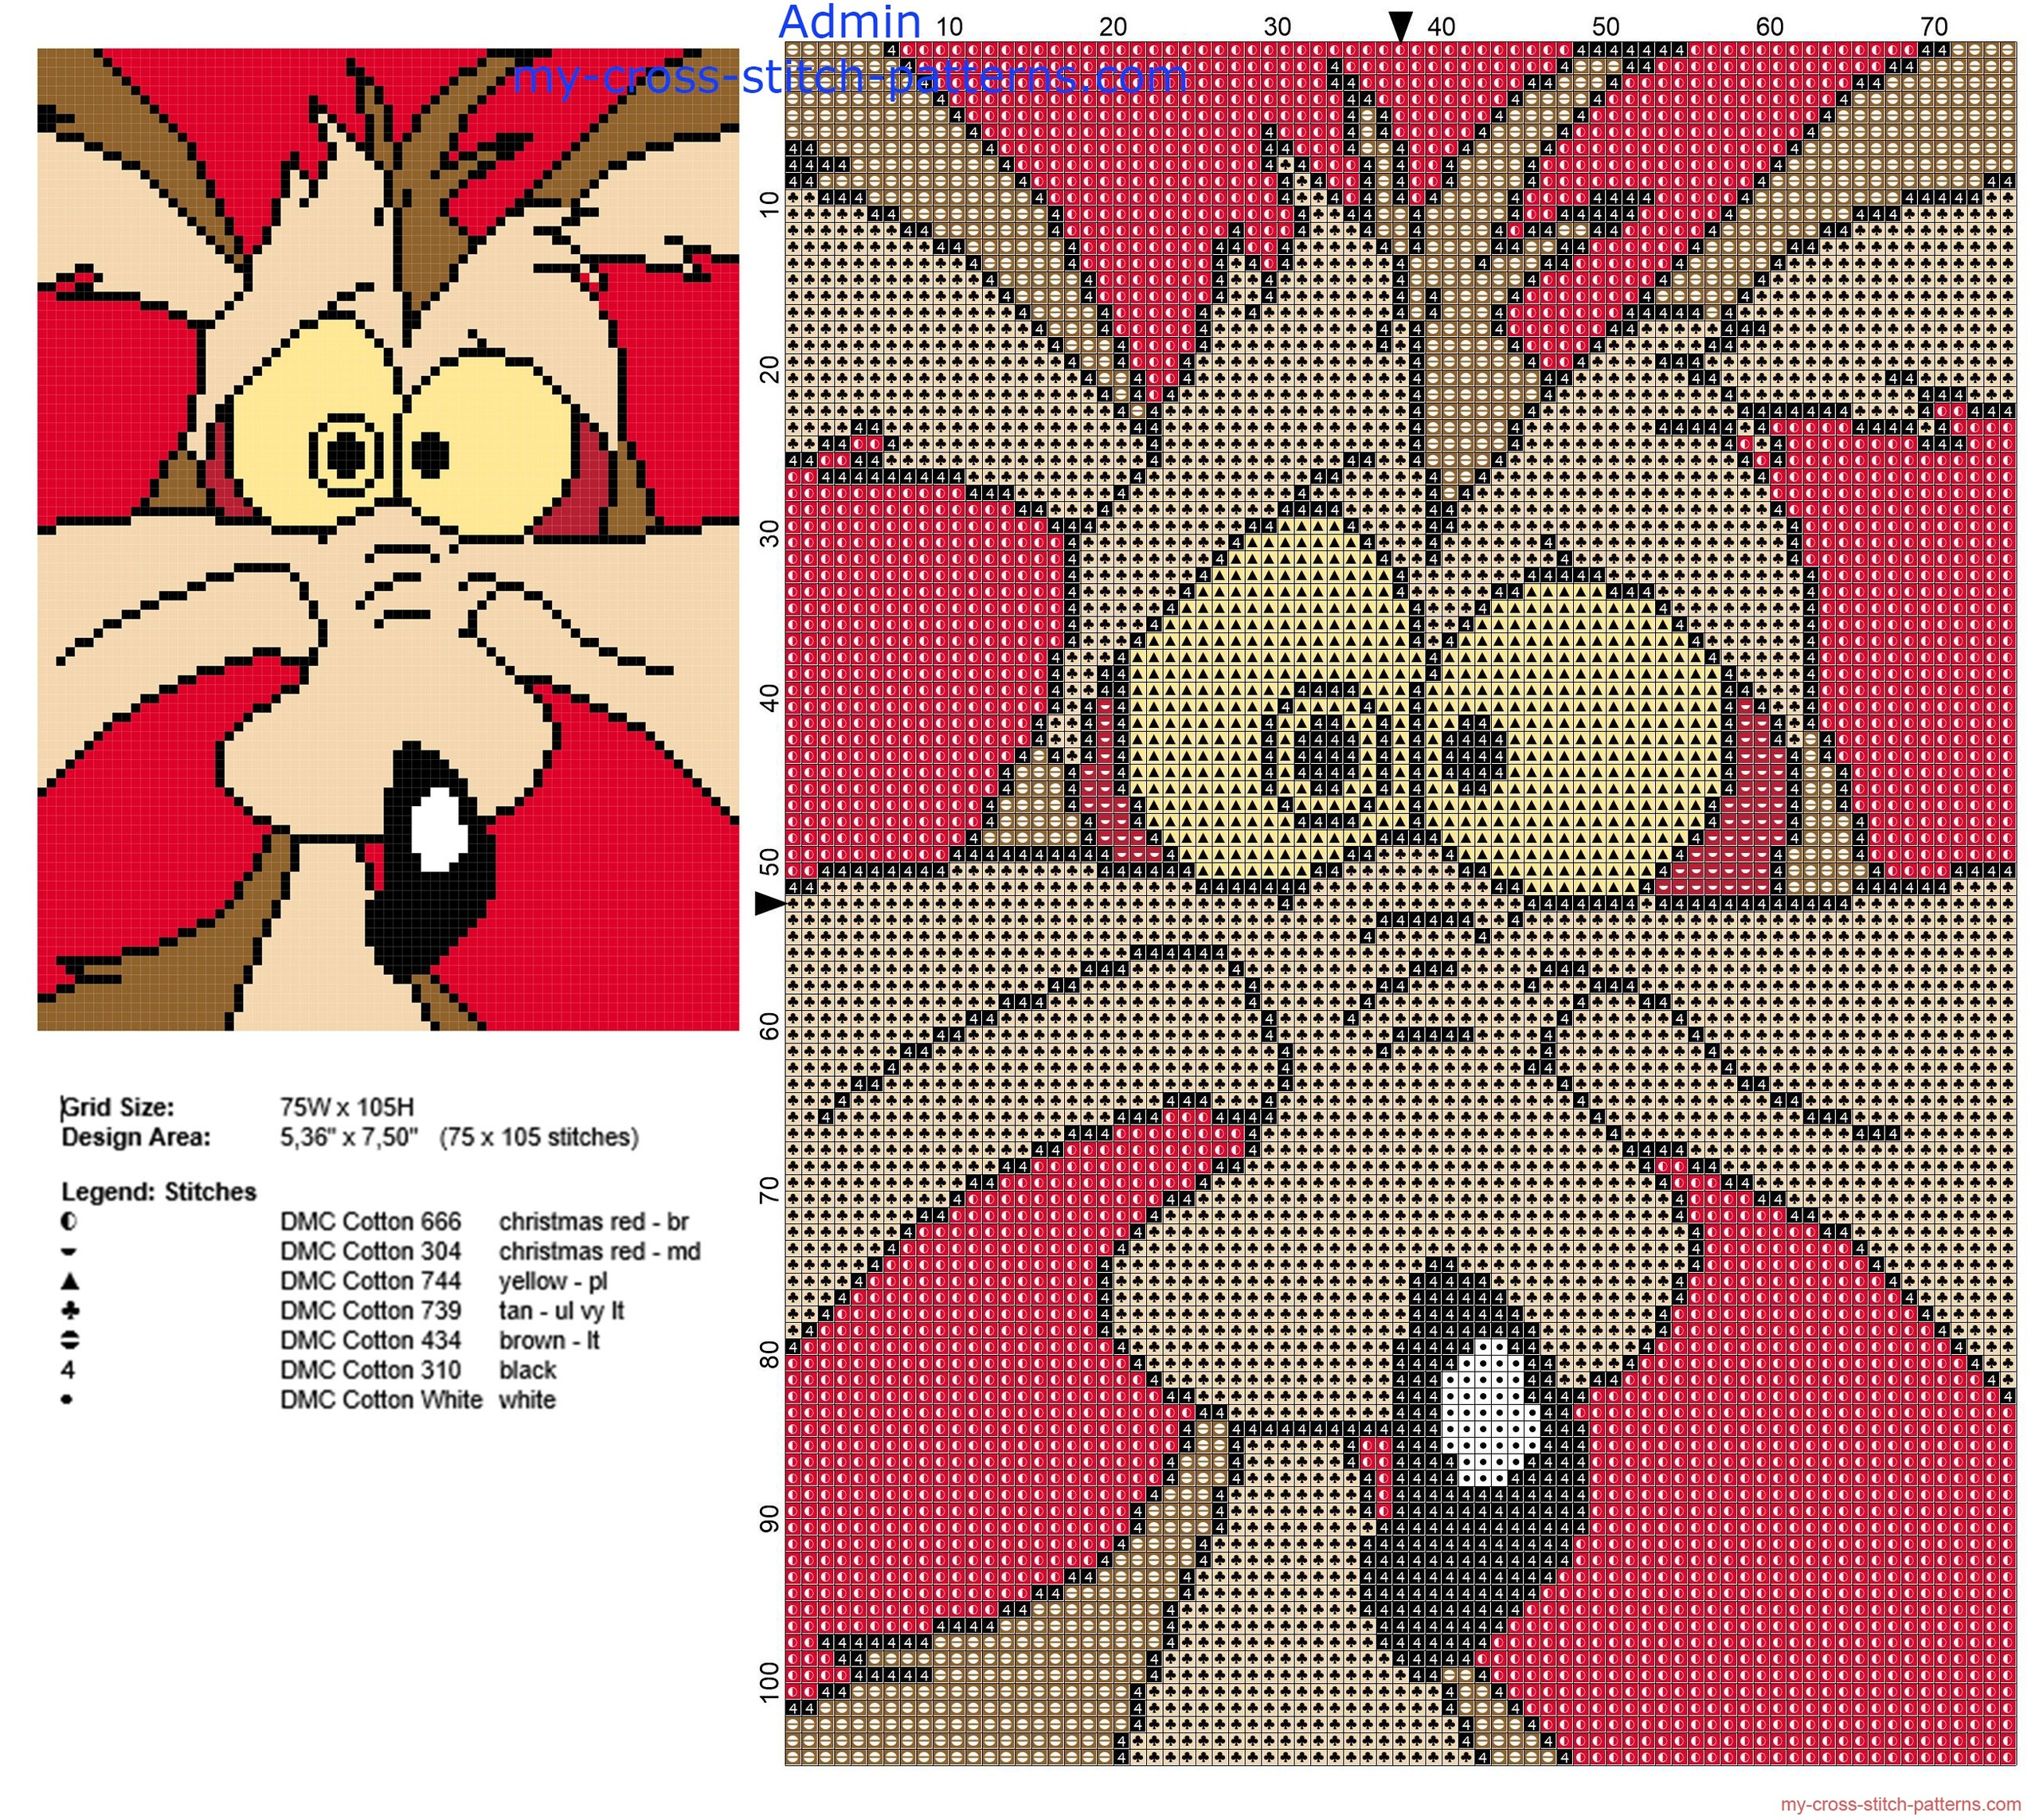 wile_e_coyote_road_runner_looney_tunes_enemy_free_cross_stitch_pattern_red_tile